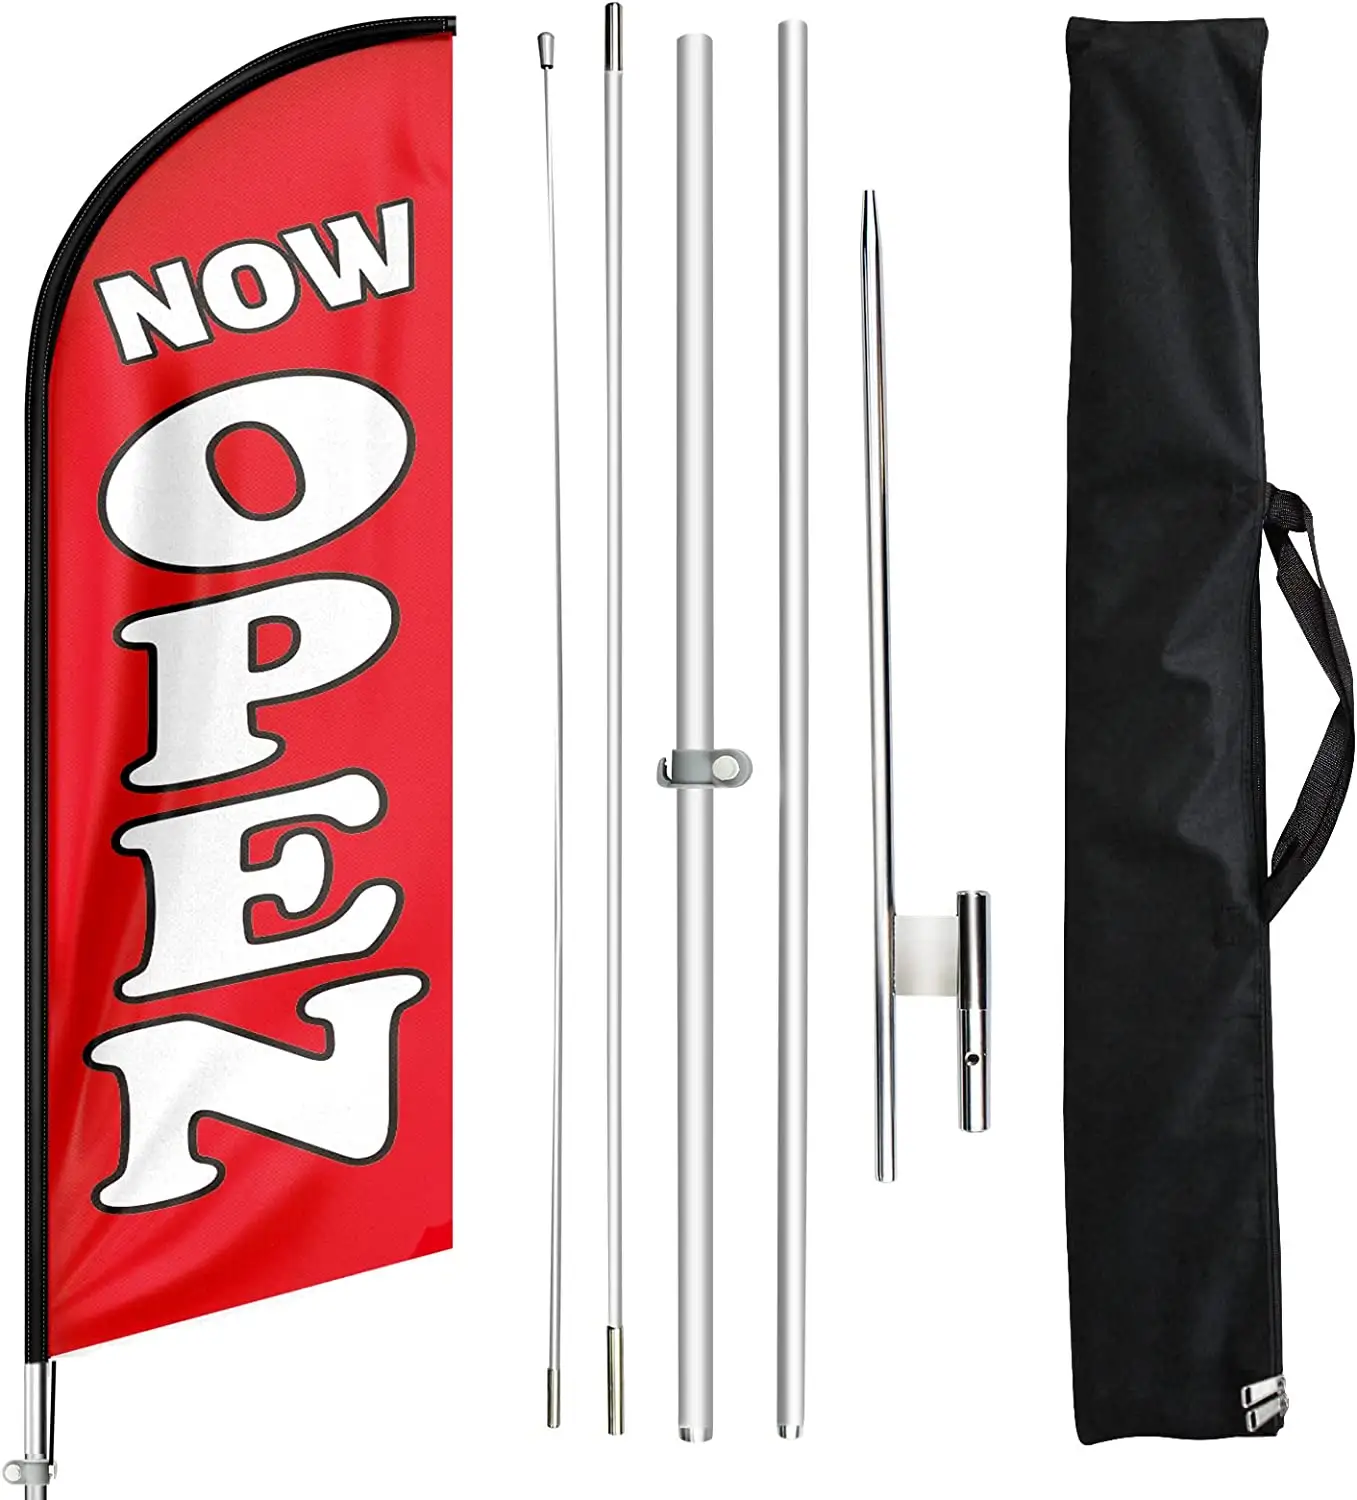 Beach Flag Pole, Now Open Flag with Pole and Ground Stake Now Open Advertising Feather Banner Sign for Businesses